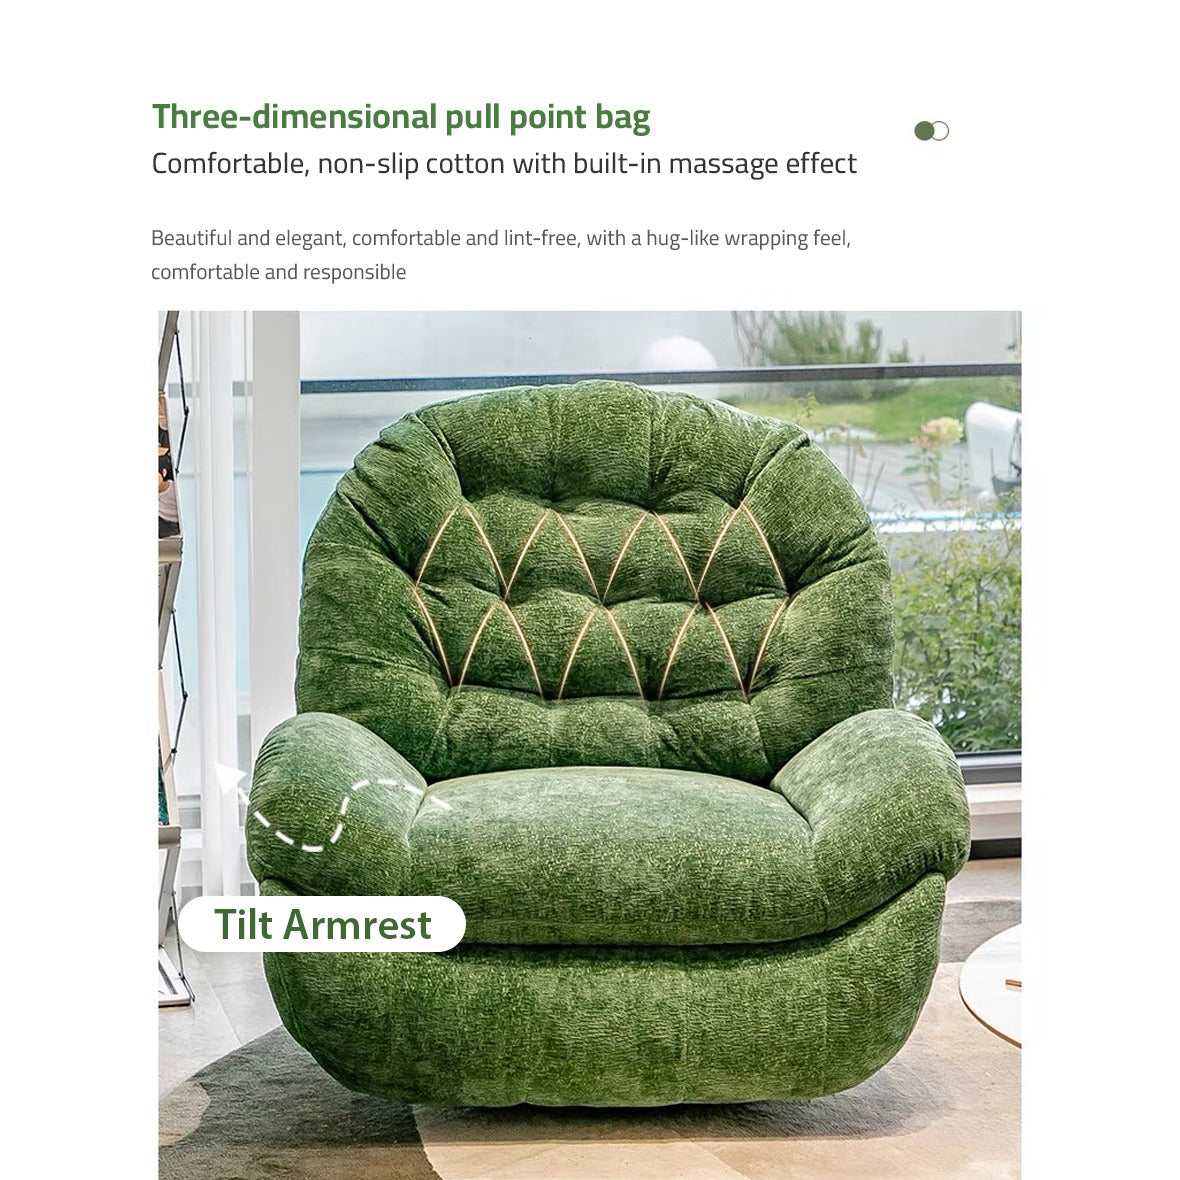 Image pointing out the Three dimensional pull point bag of an Adjustable Single Sofa Recliner